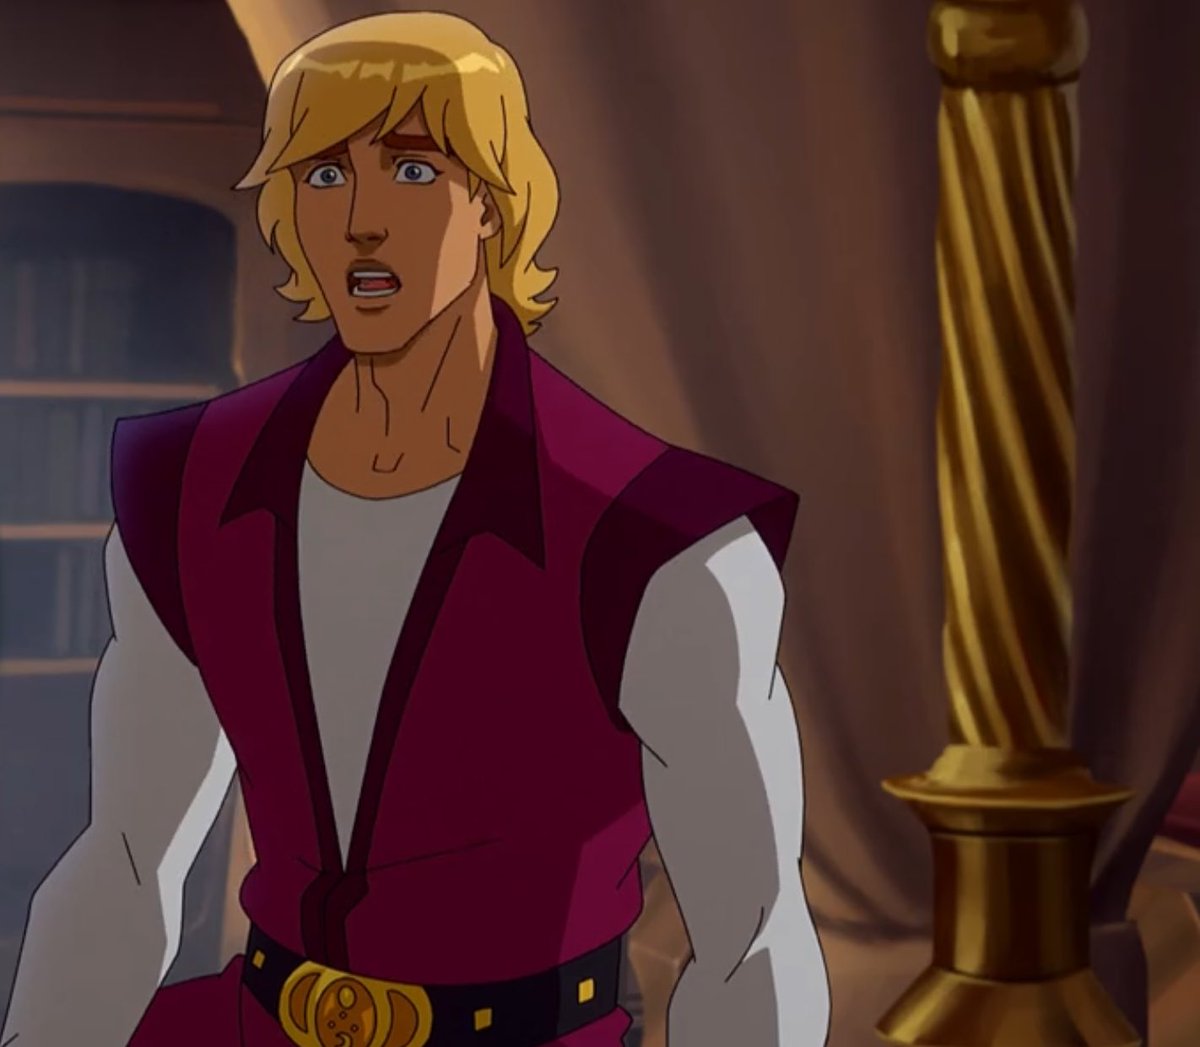 Wait-

Mars had a Queen?

He had never heard of mars

Or it’s Queen..

But that doesn’t mean the prince would treat her without the respect that was warranted!

“I’m Adam, prince of Eternia. It’s good to meet you, Queen.”